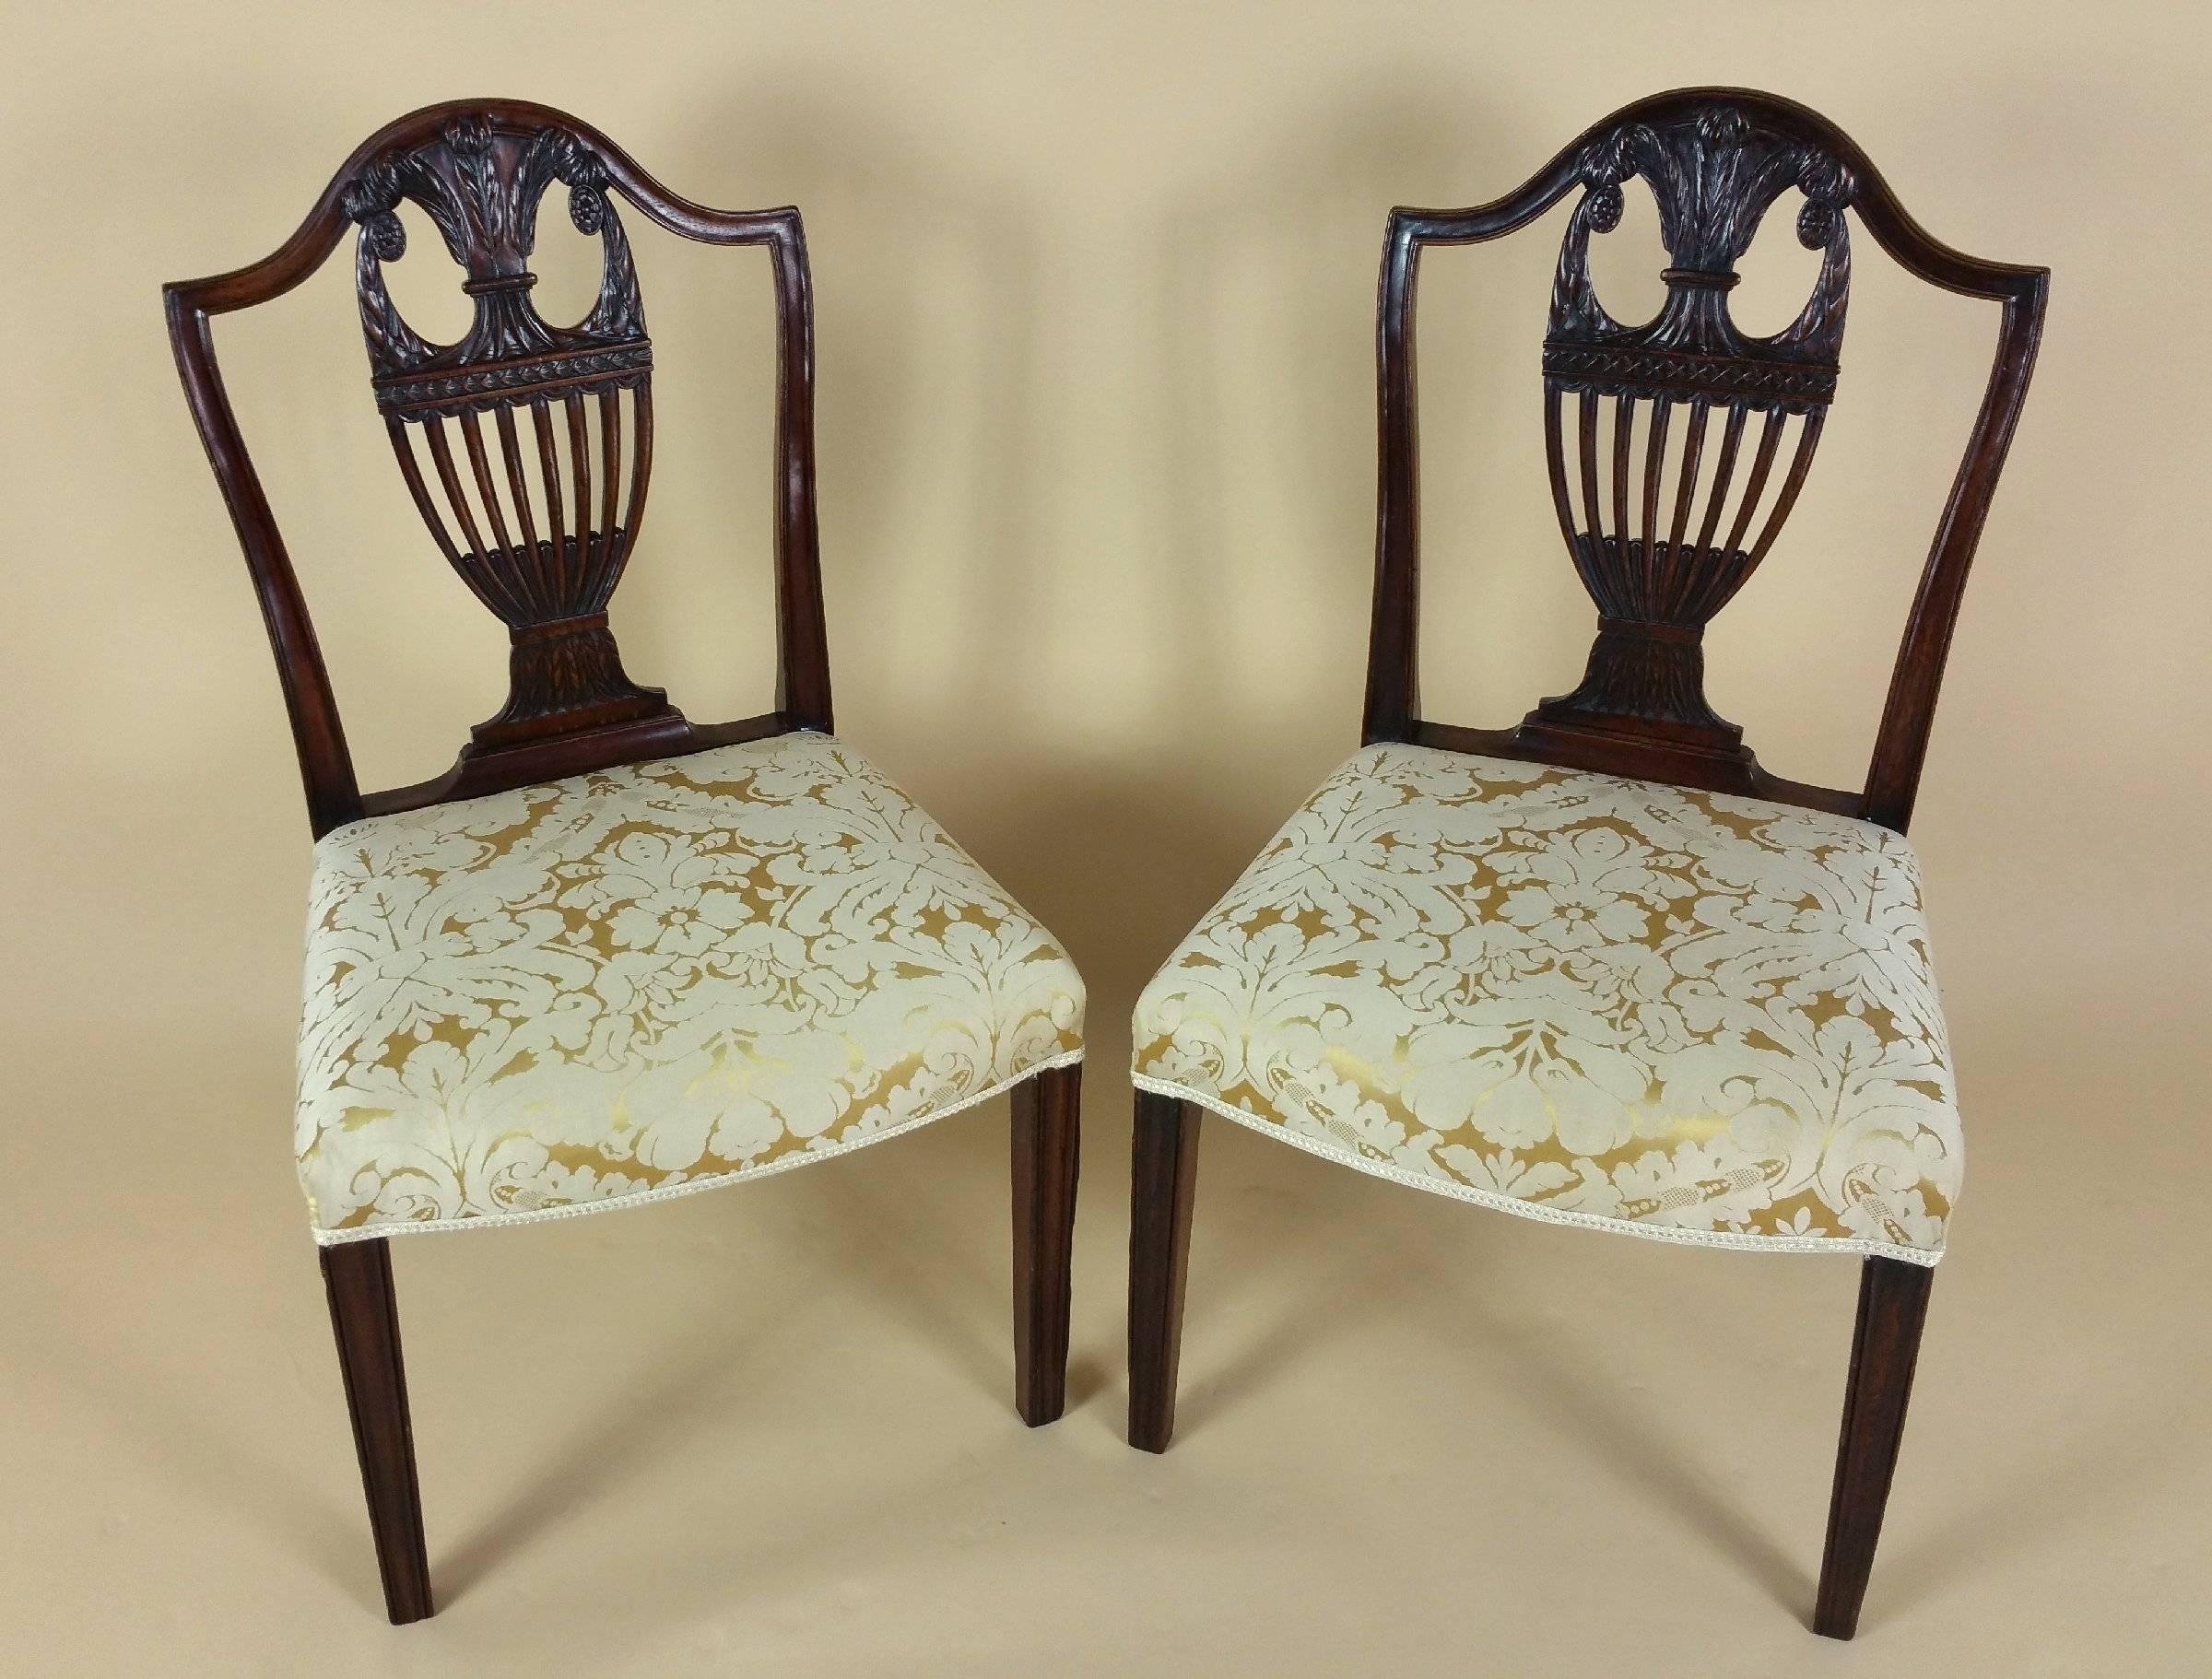 This lovely pair of George III carved mahogany side chairs feature Prince of Wales feather backs and are upholstered in a light gold silk Damask. Each chair measures 21 in – 53.3 cm wide, 19 in – 48.2 cm deep and 37 in – 94 cm high, with a seat